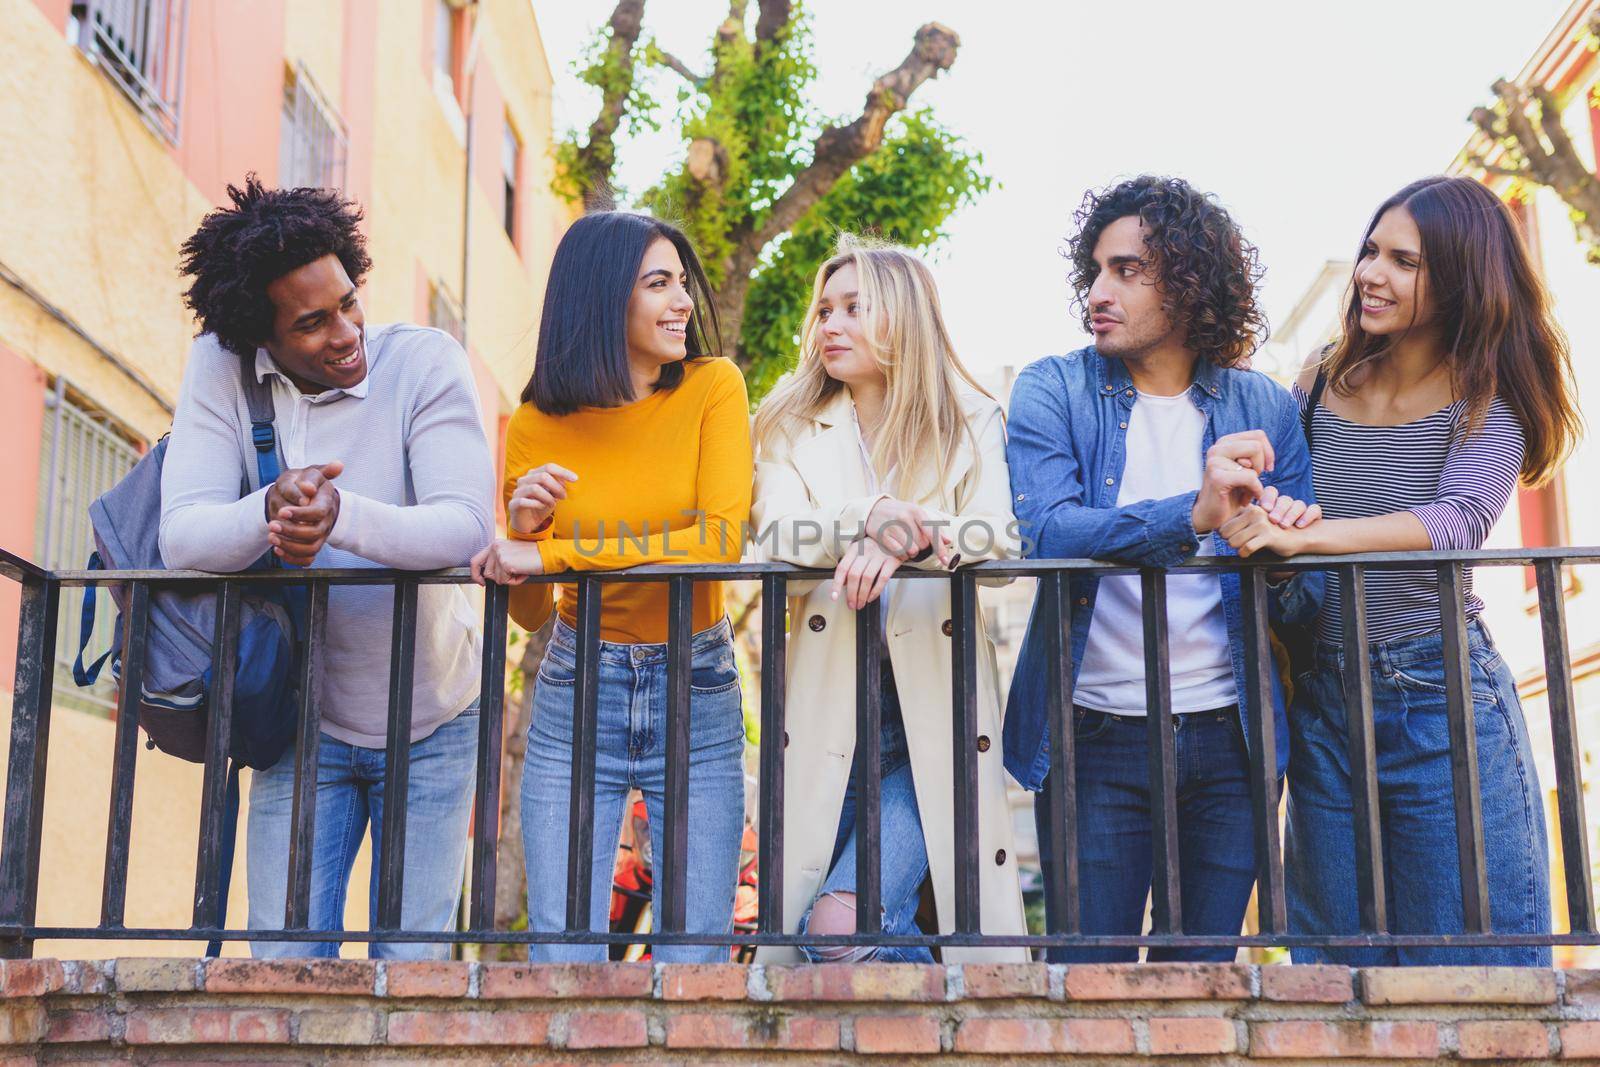 Multi-ethnic group of friends gathered in the street leaning on a railing. Young people having fun together.